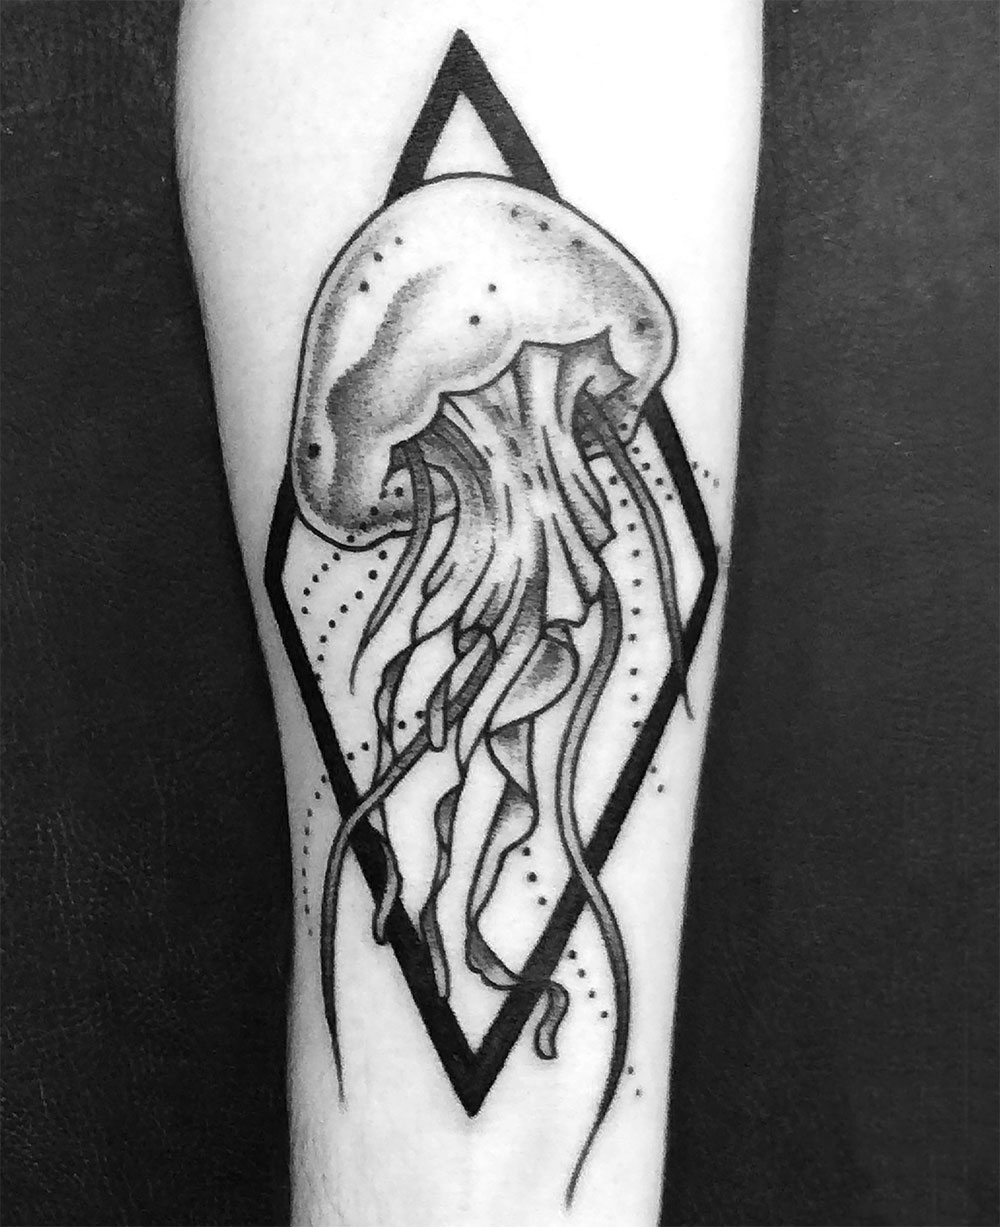 jellyfish tattoo breaking out of a diamond shape